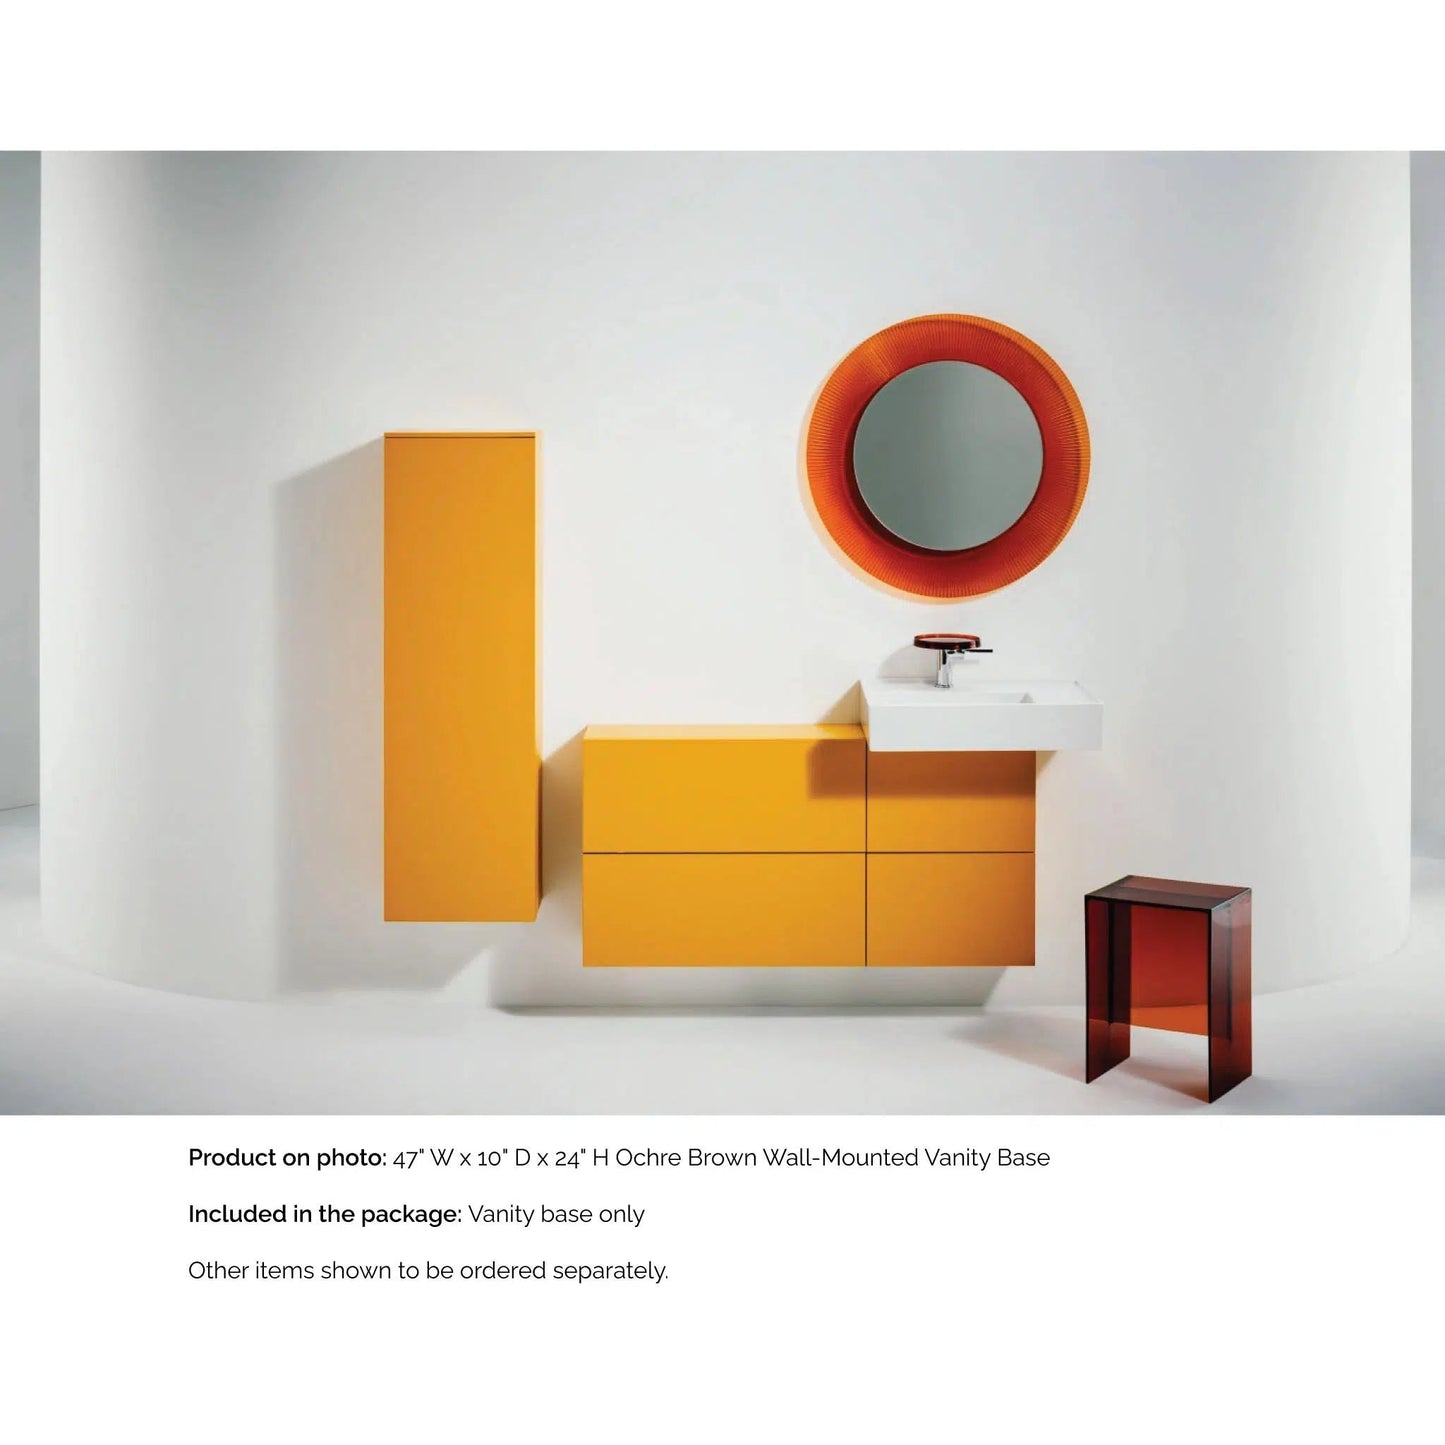 Laufen Kartell 47" 1-Door and 2-Flap Ochre Brown Wall-Mounted Sideboard Vanity With Sink Placement on the Right